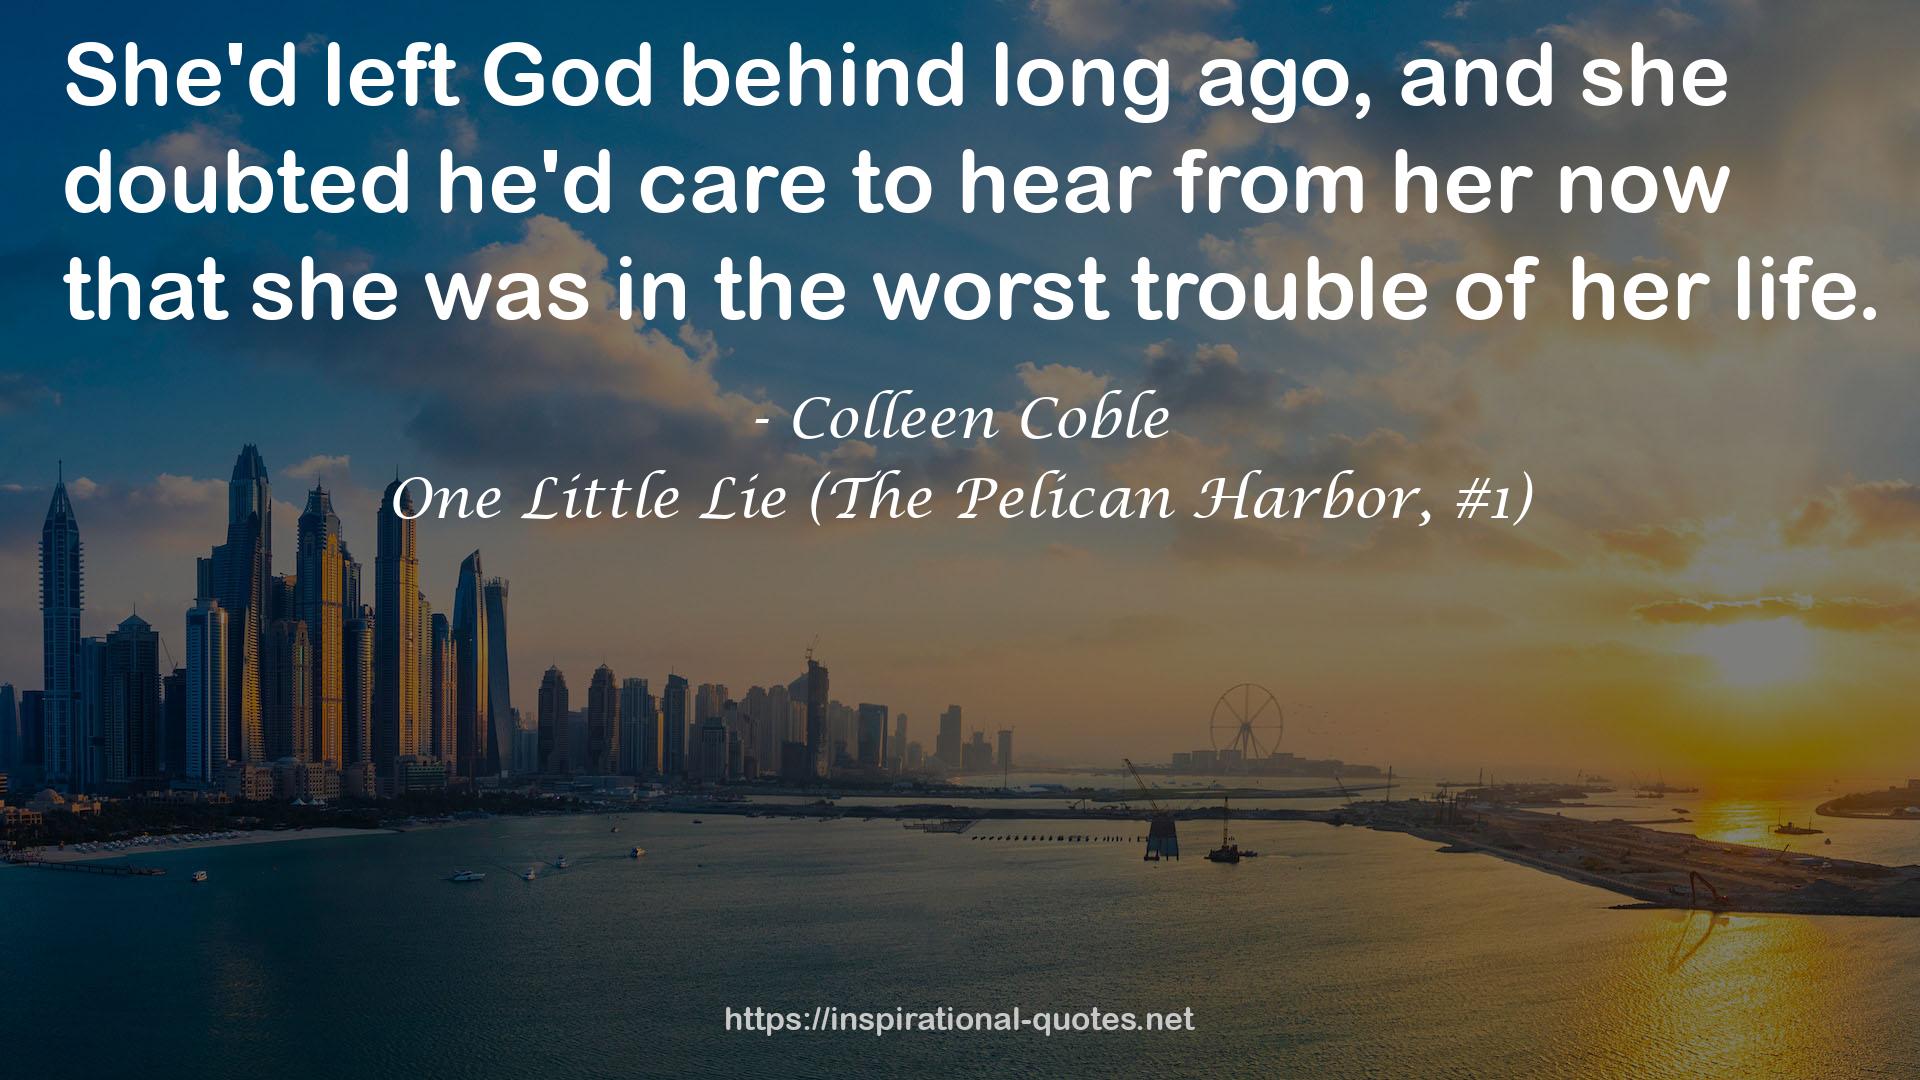 One Little Lie (The Pelican Harbor, #1) QUOTES